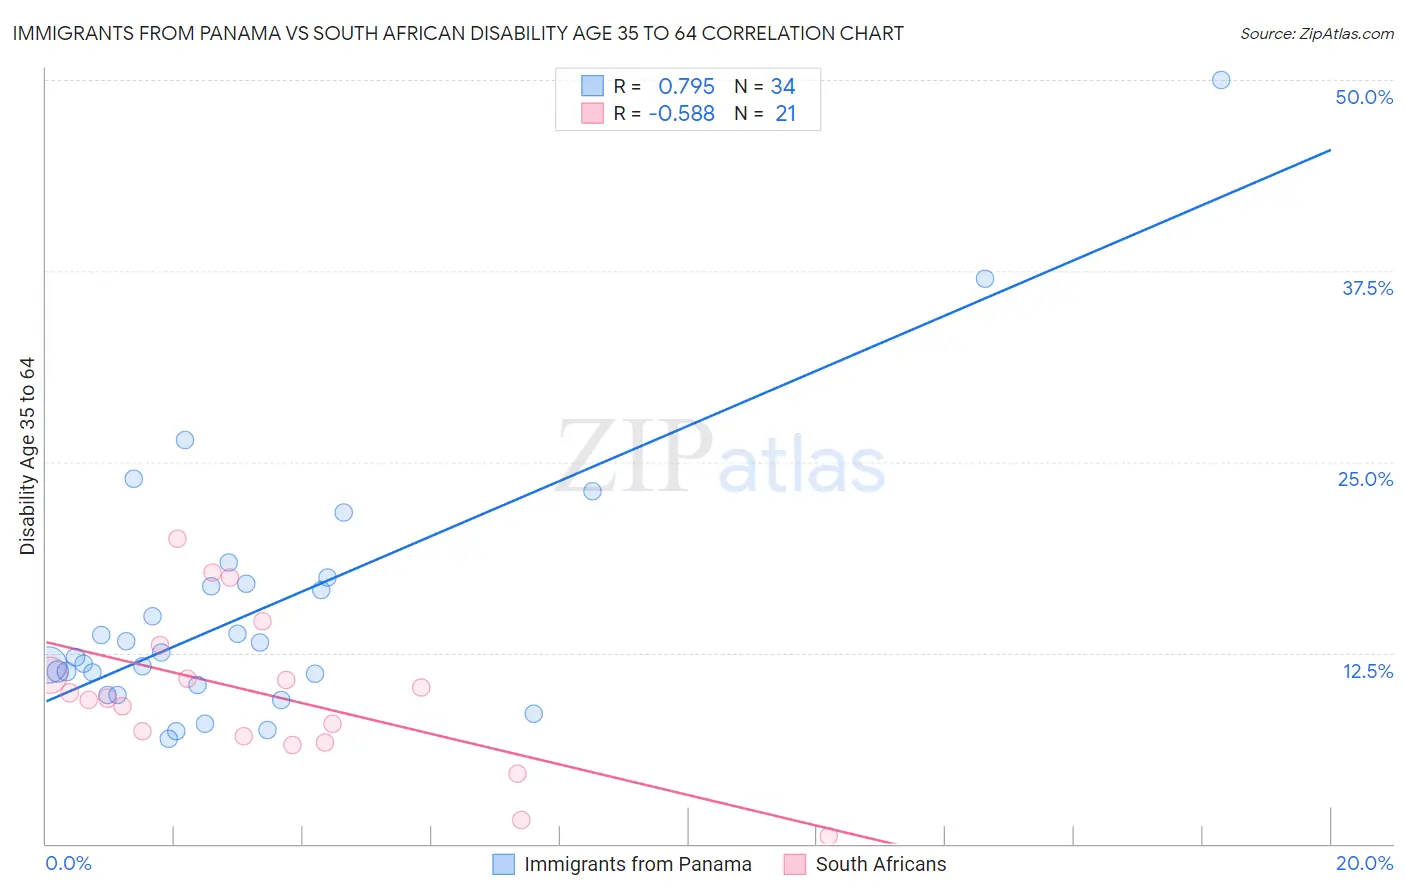 Immigrants from Panama vs South African Disability Age 35 to 64